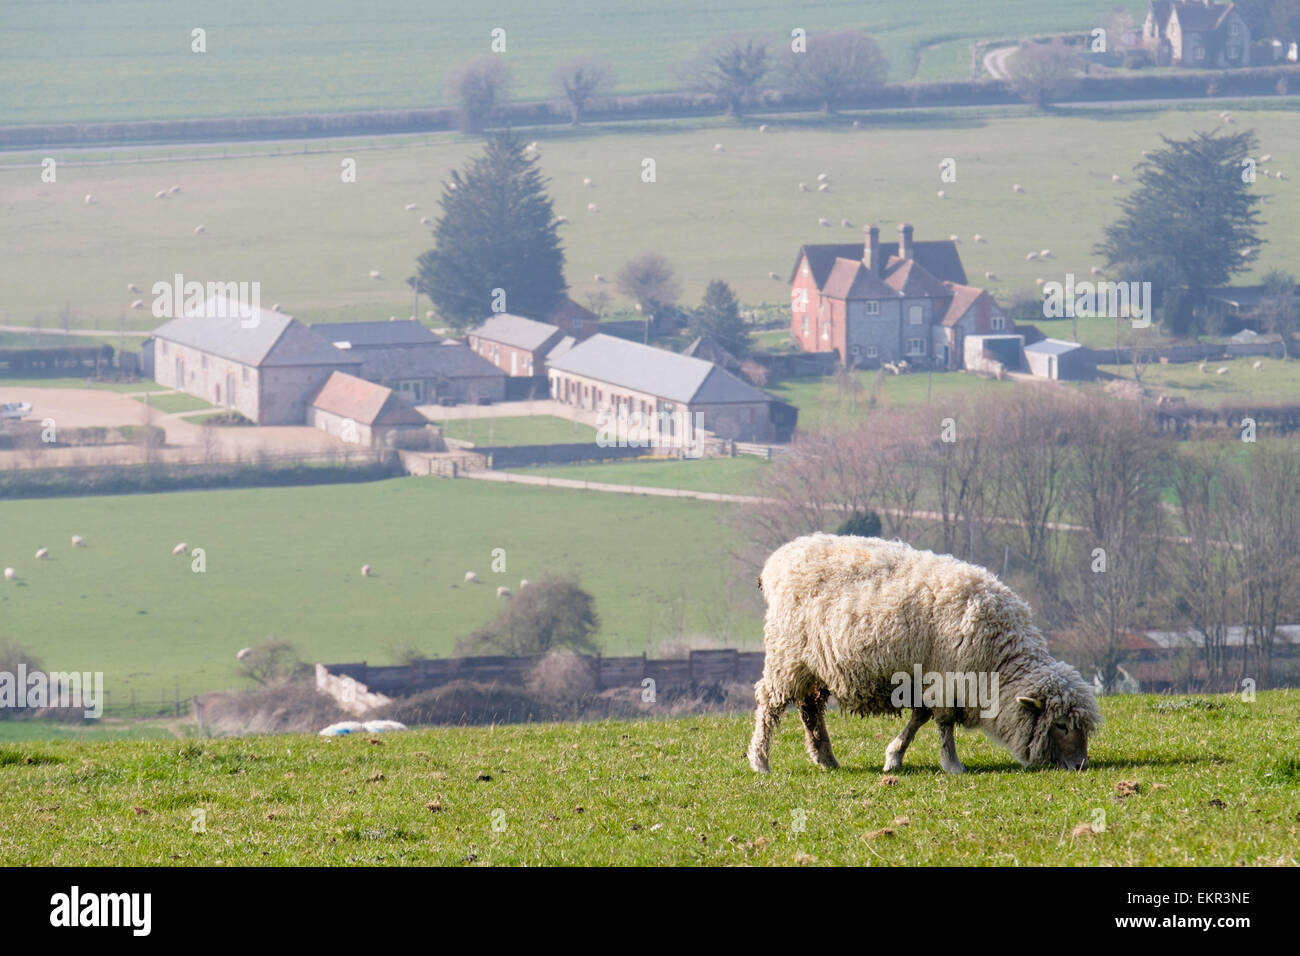 One Poll Dorset sheep grazing on Haye's Down hill in English  countryside in South Downs National Park. West Dean Chichester West Sussex England UK Stock Photo